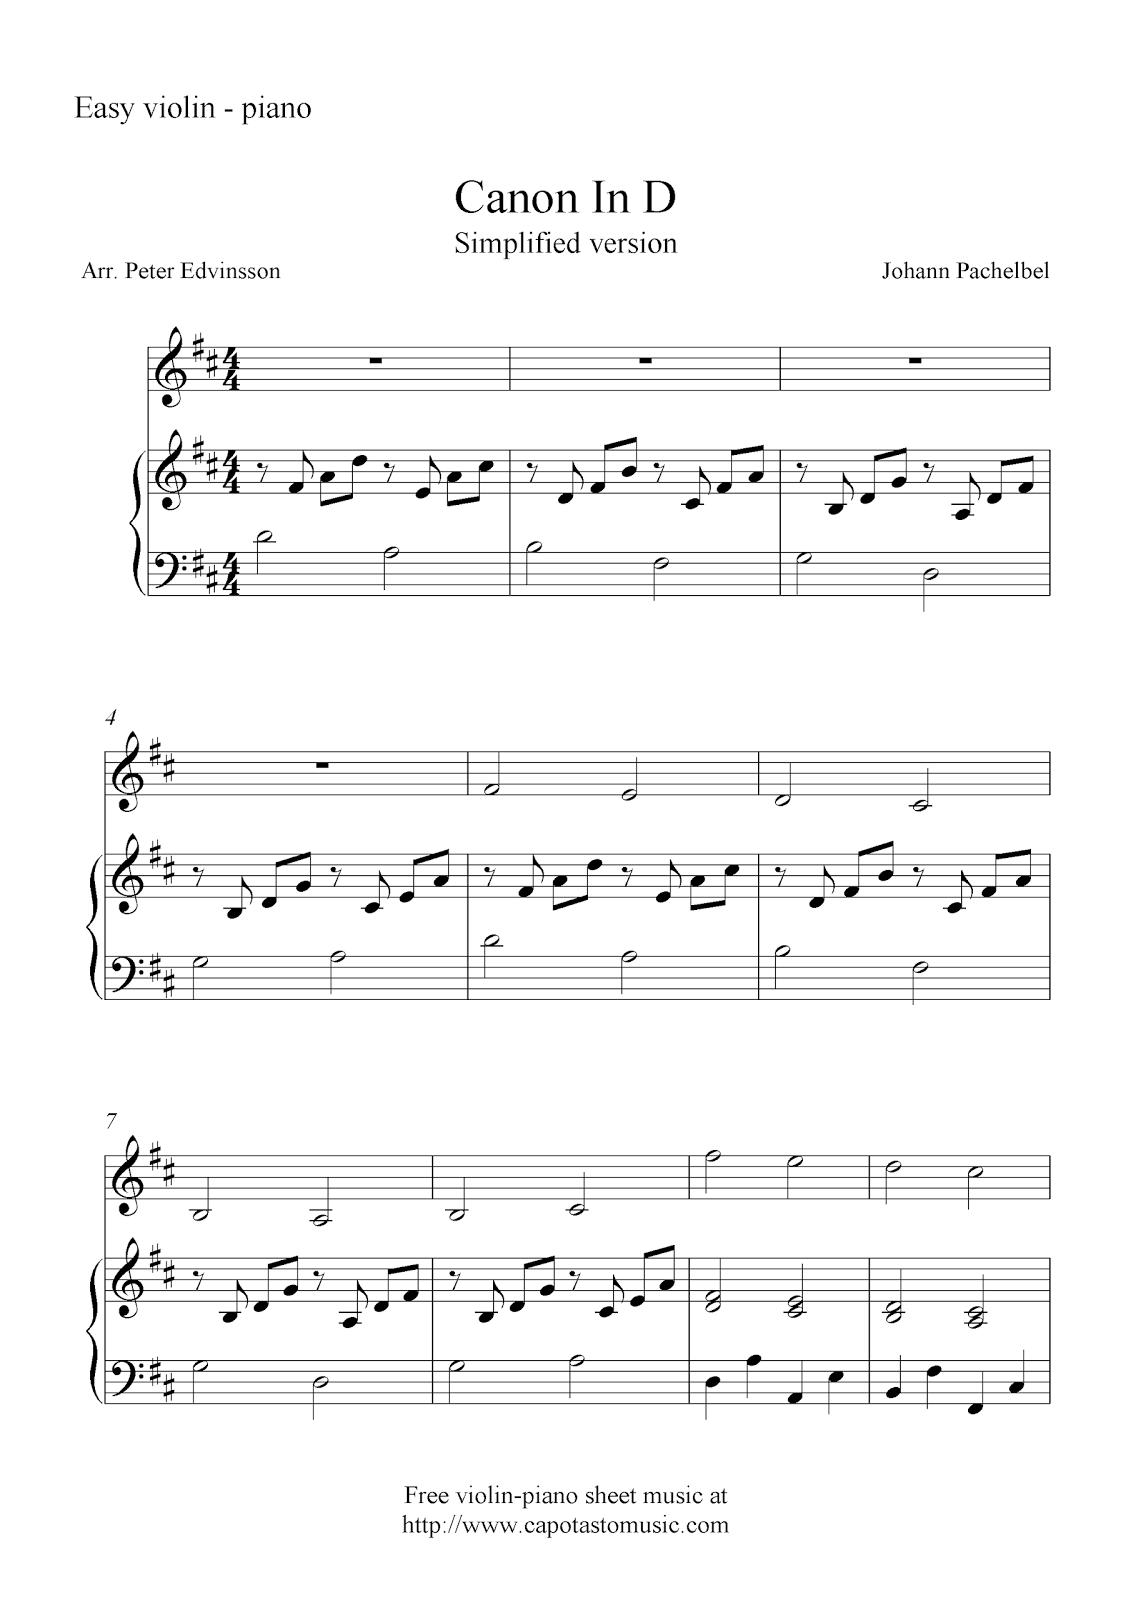 Canon In D (Simplified version), free violin and piano sheet music notes